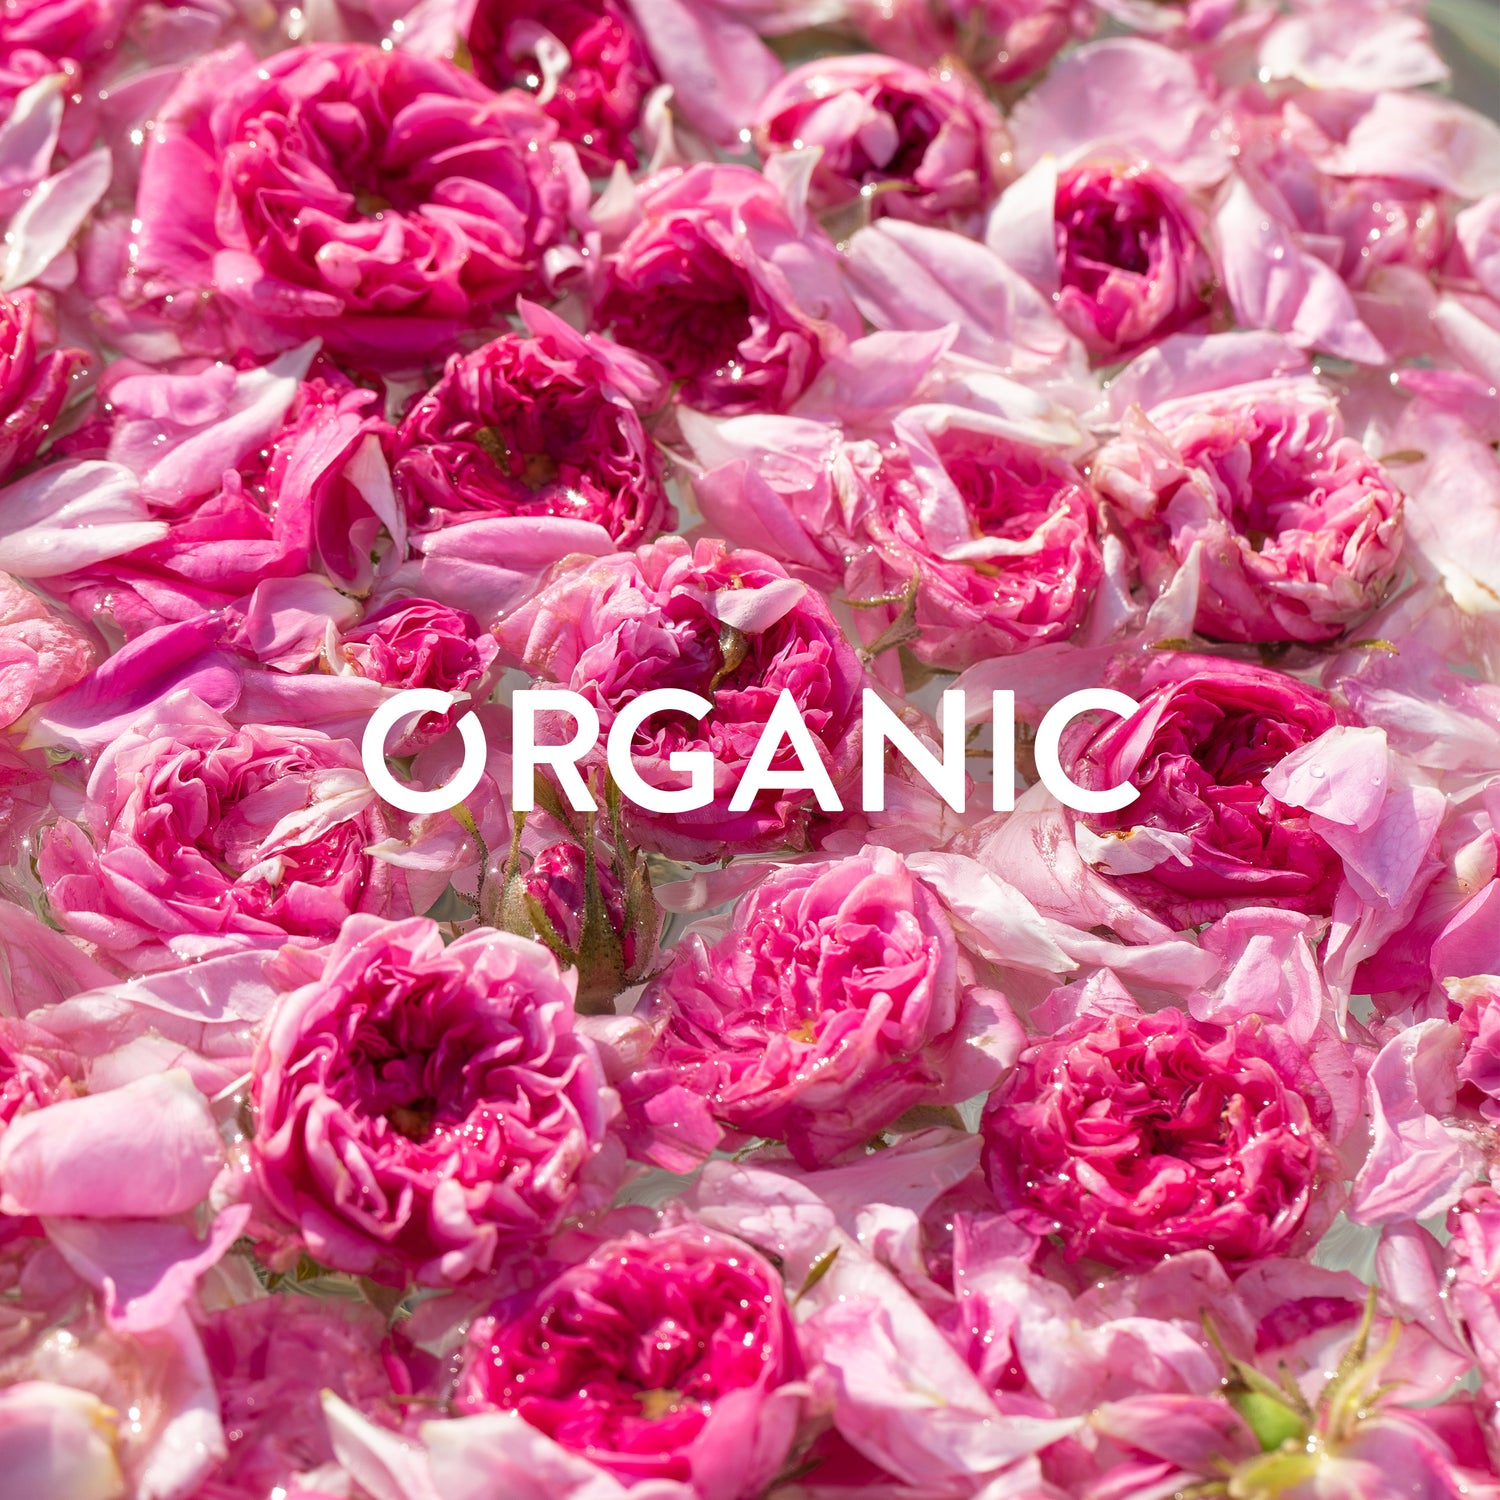 A pink bouquet of organic flowers plucked from the rosa damascena rose fields in Bulgaria.